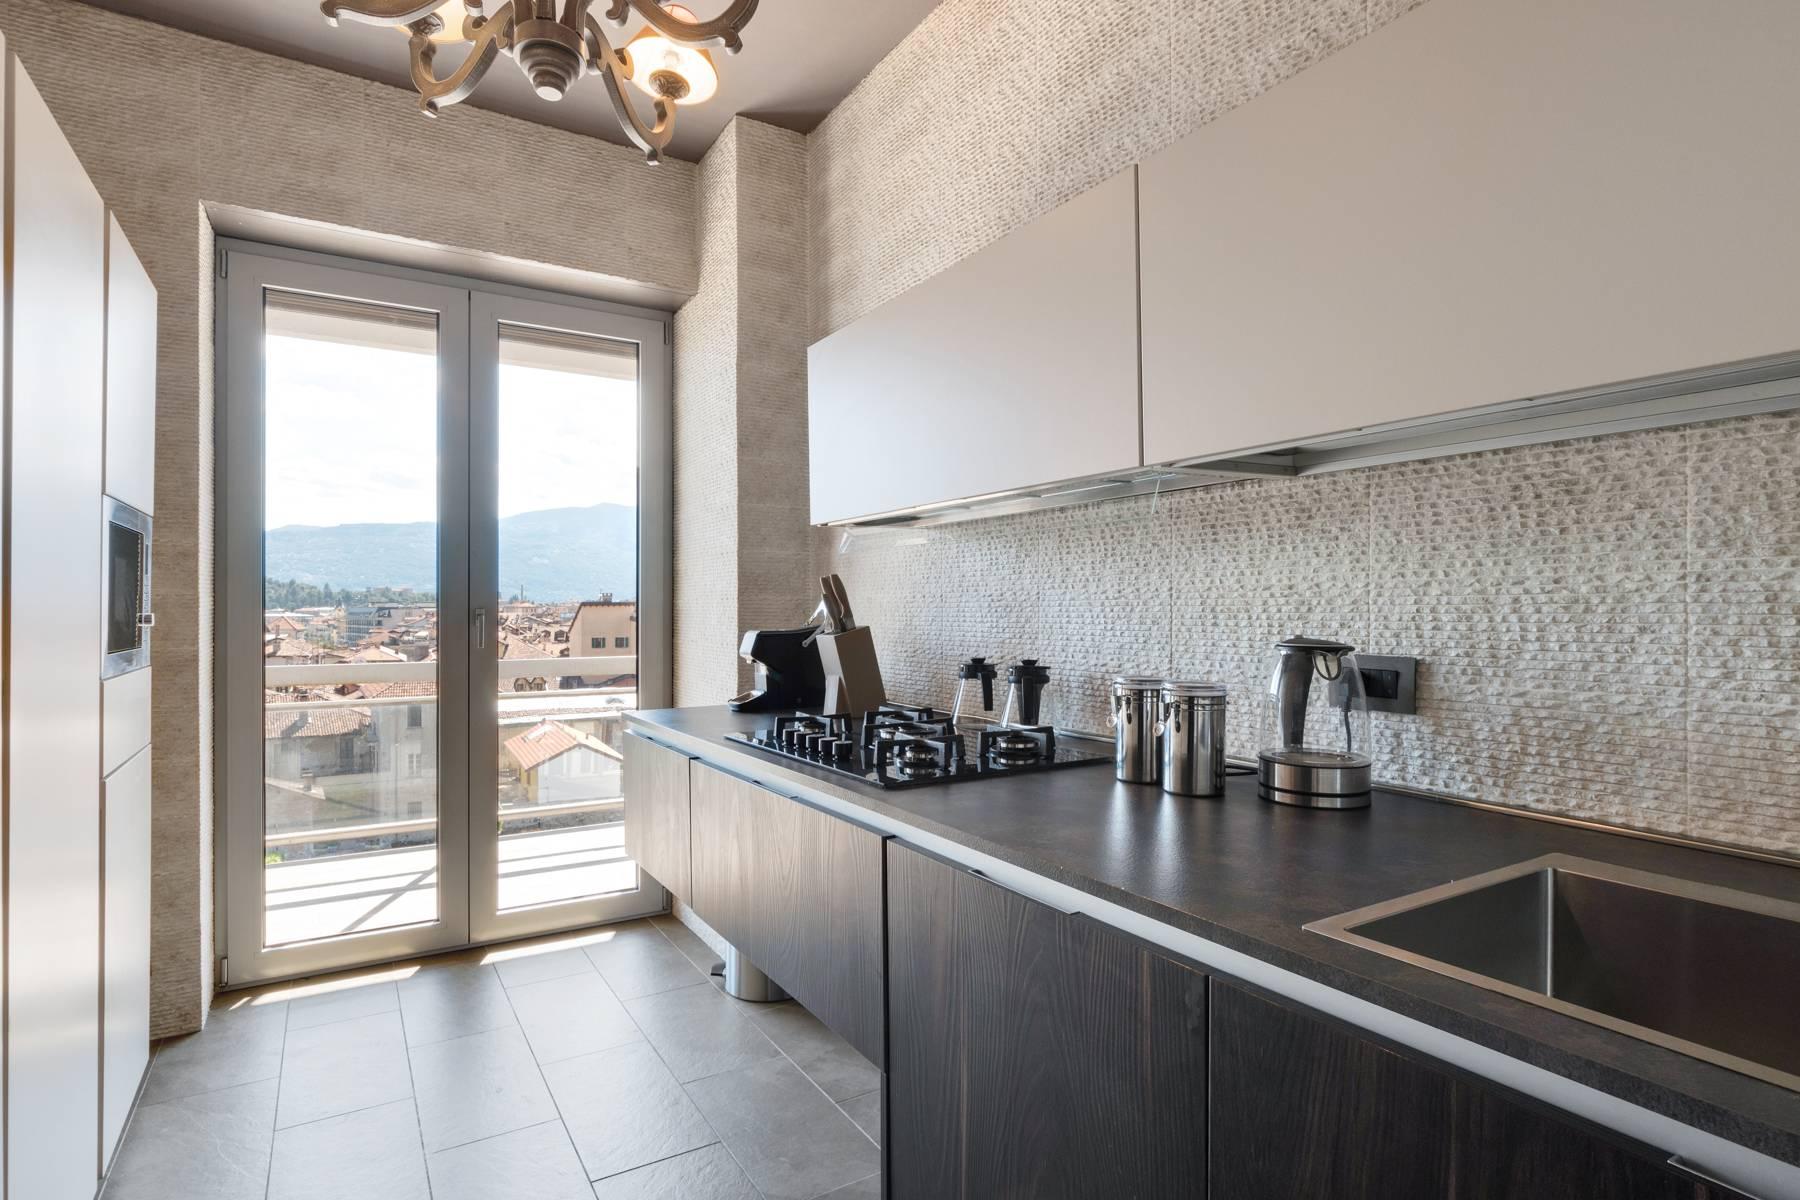 Breathtaking penthouse with balcony and terrace overlooking all the lake Maggiore located in the center of Intra - 21